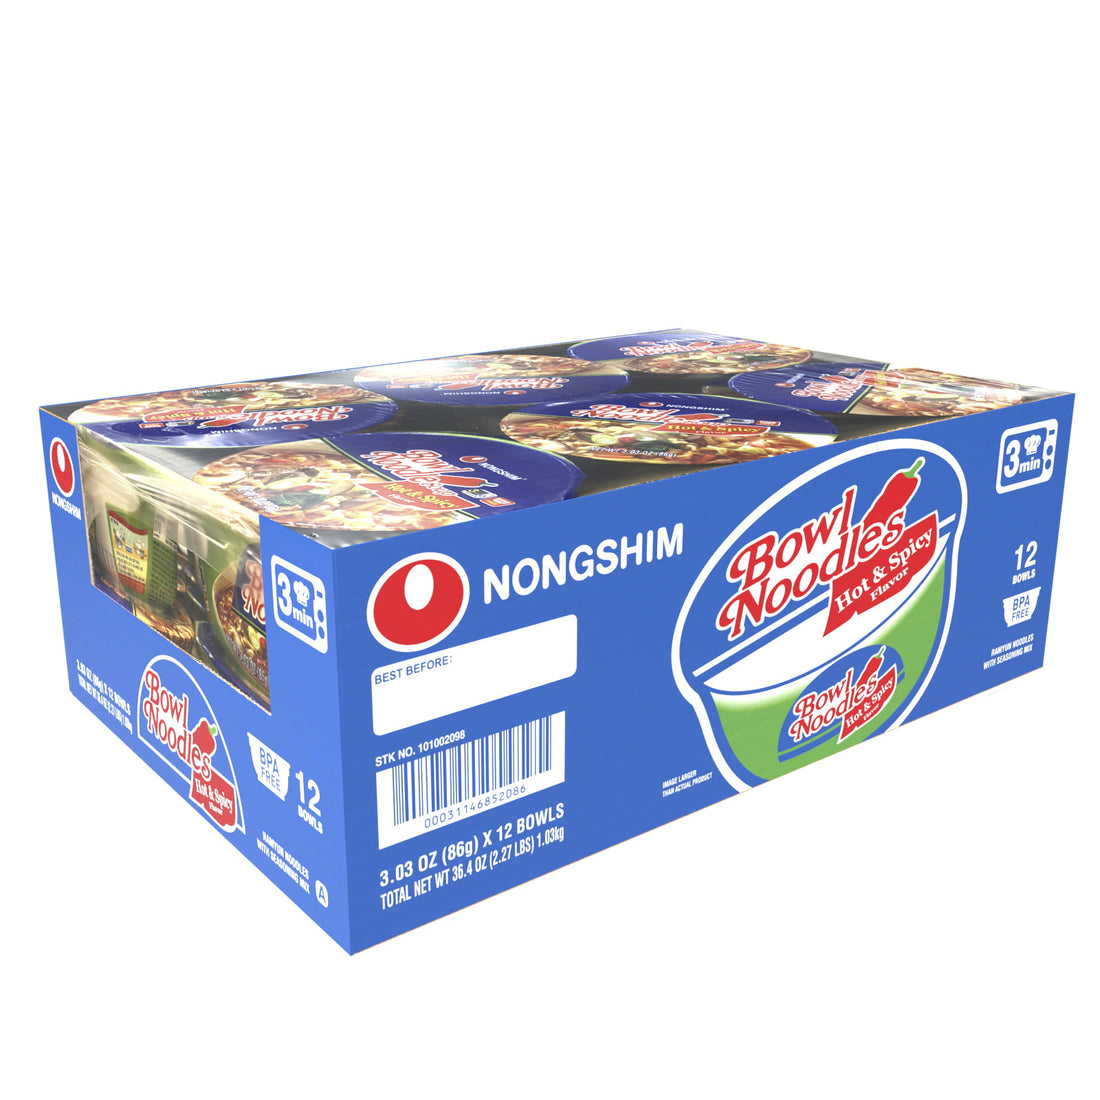 Nongshim Bowl Noodle Hot & Spicy Beef Ramen 12-pack 농심 라면